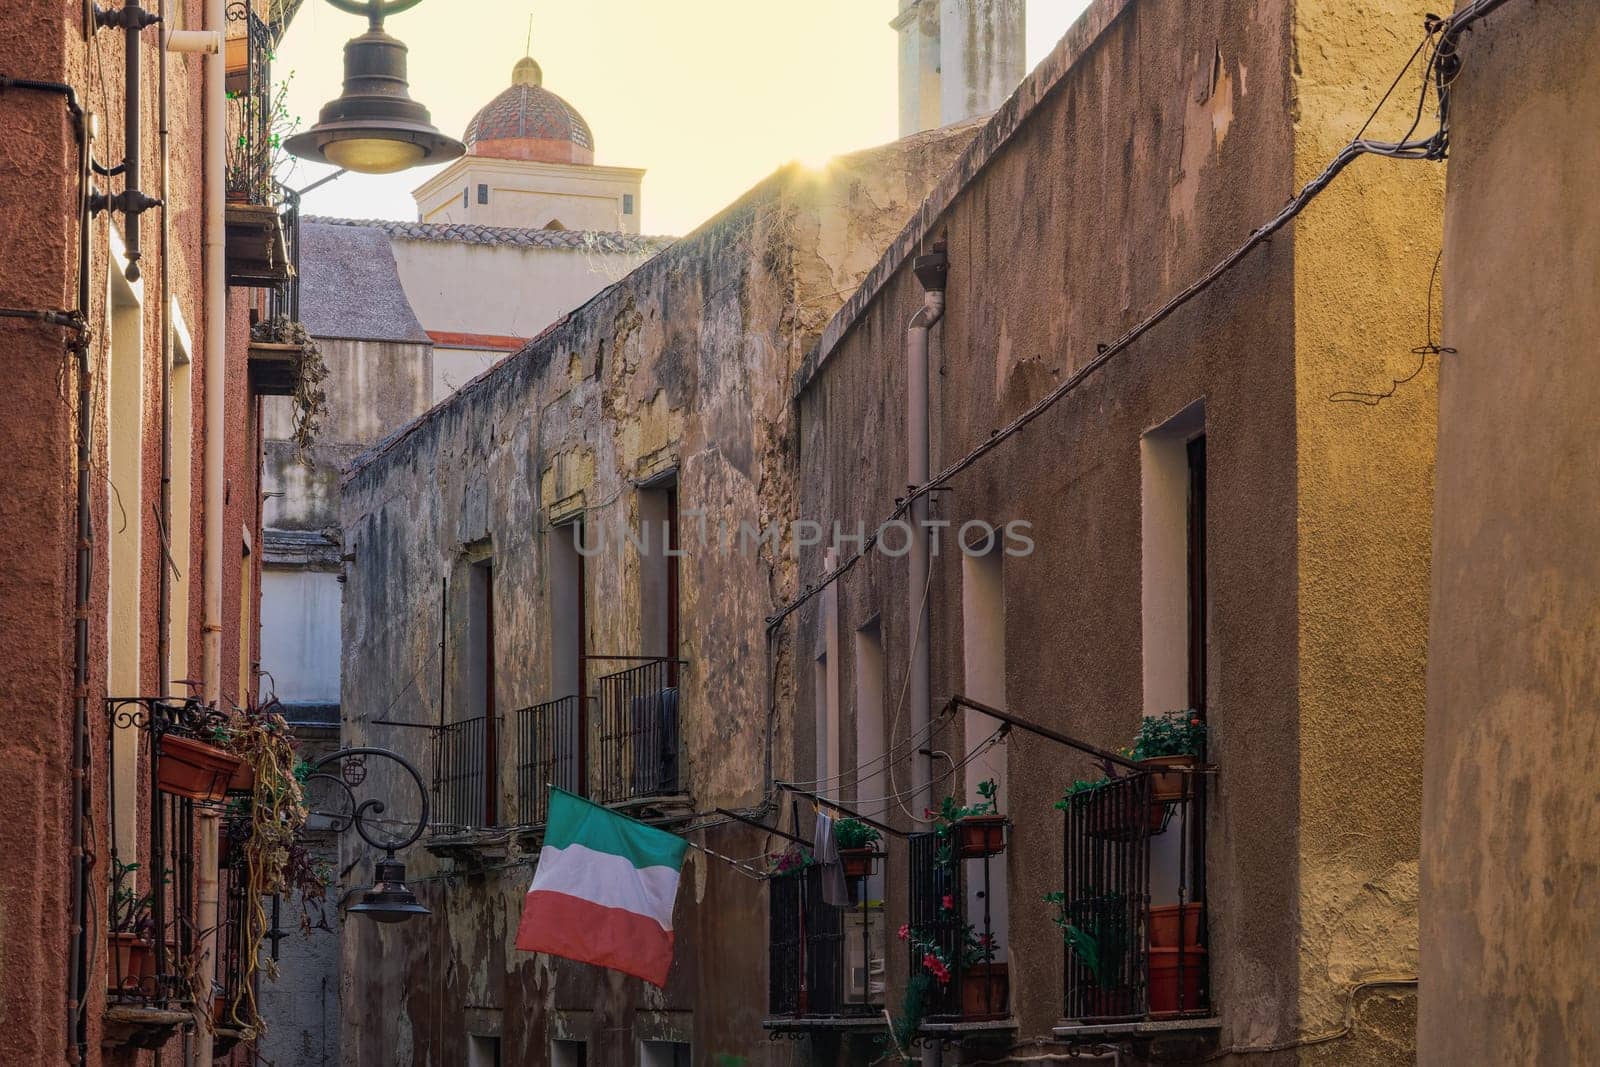 Cagliari citadel alley with traditional buildings with iron balconies and Italian flag waving in Sardinia Island, Italy.